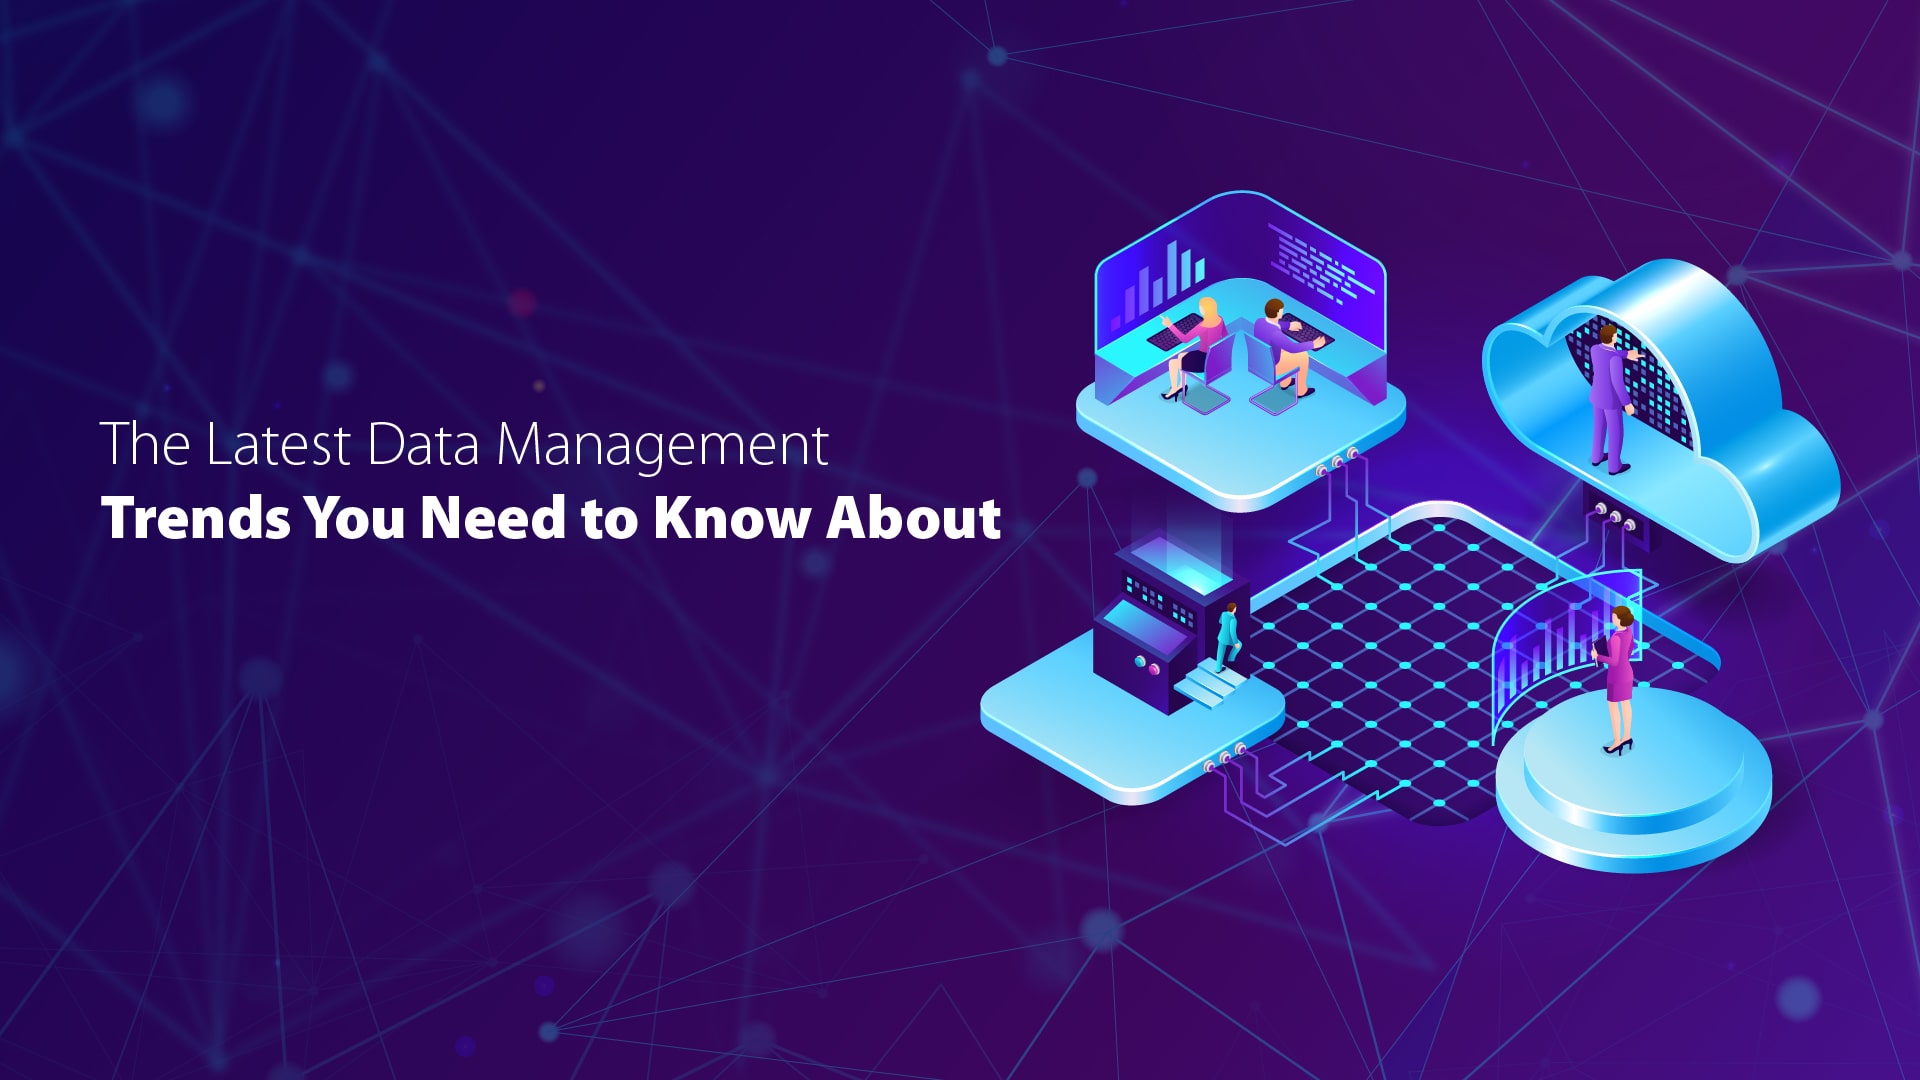 The Latest Data Management Trends You Need to Know About